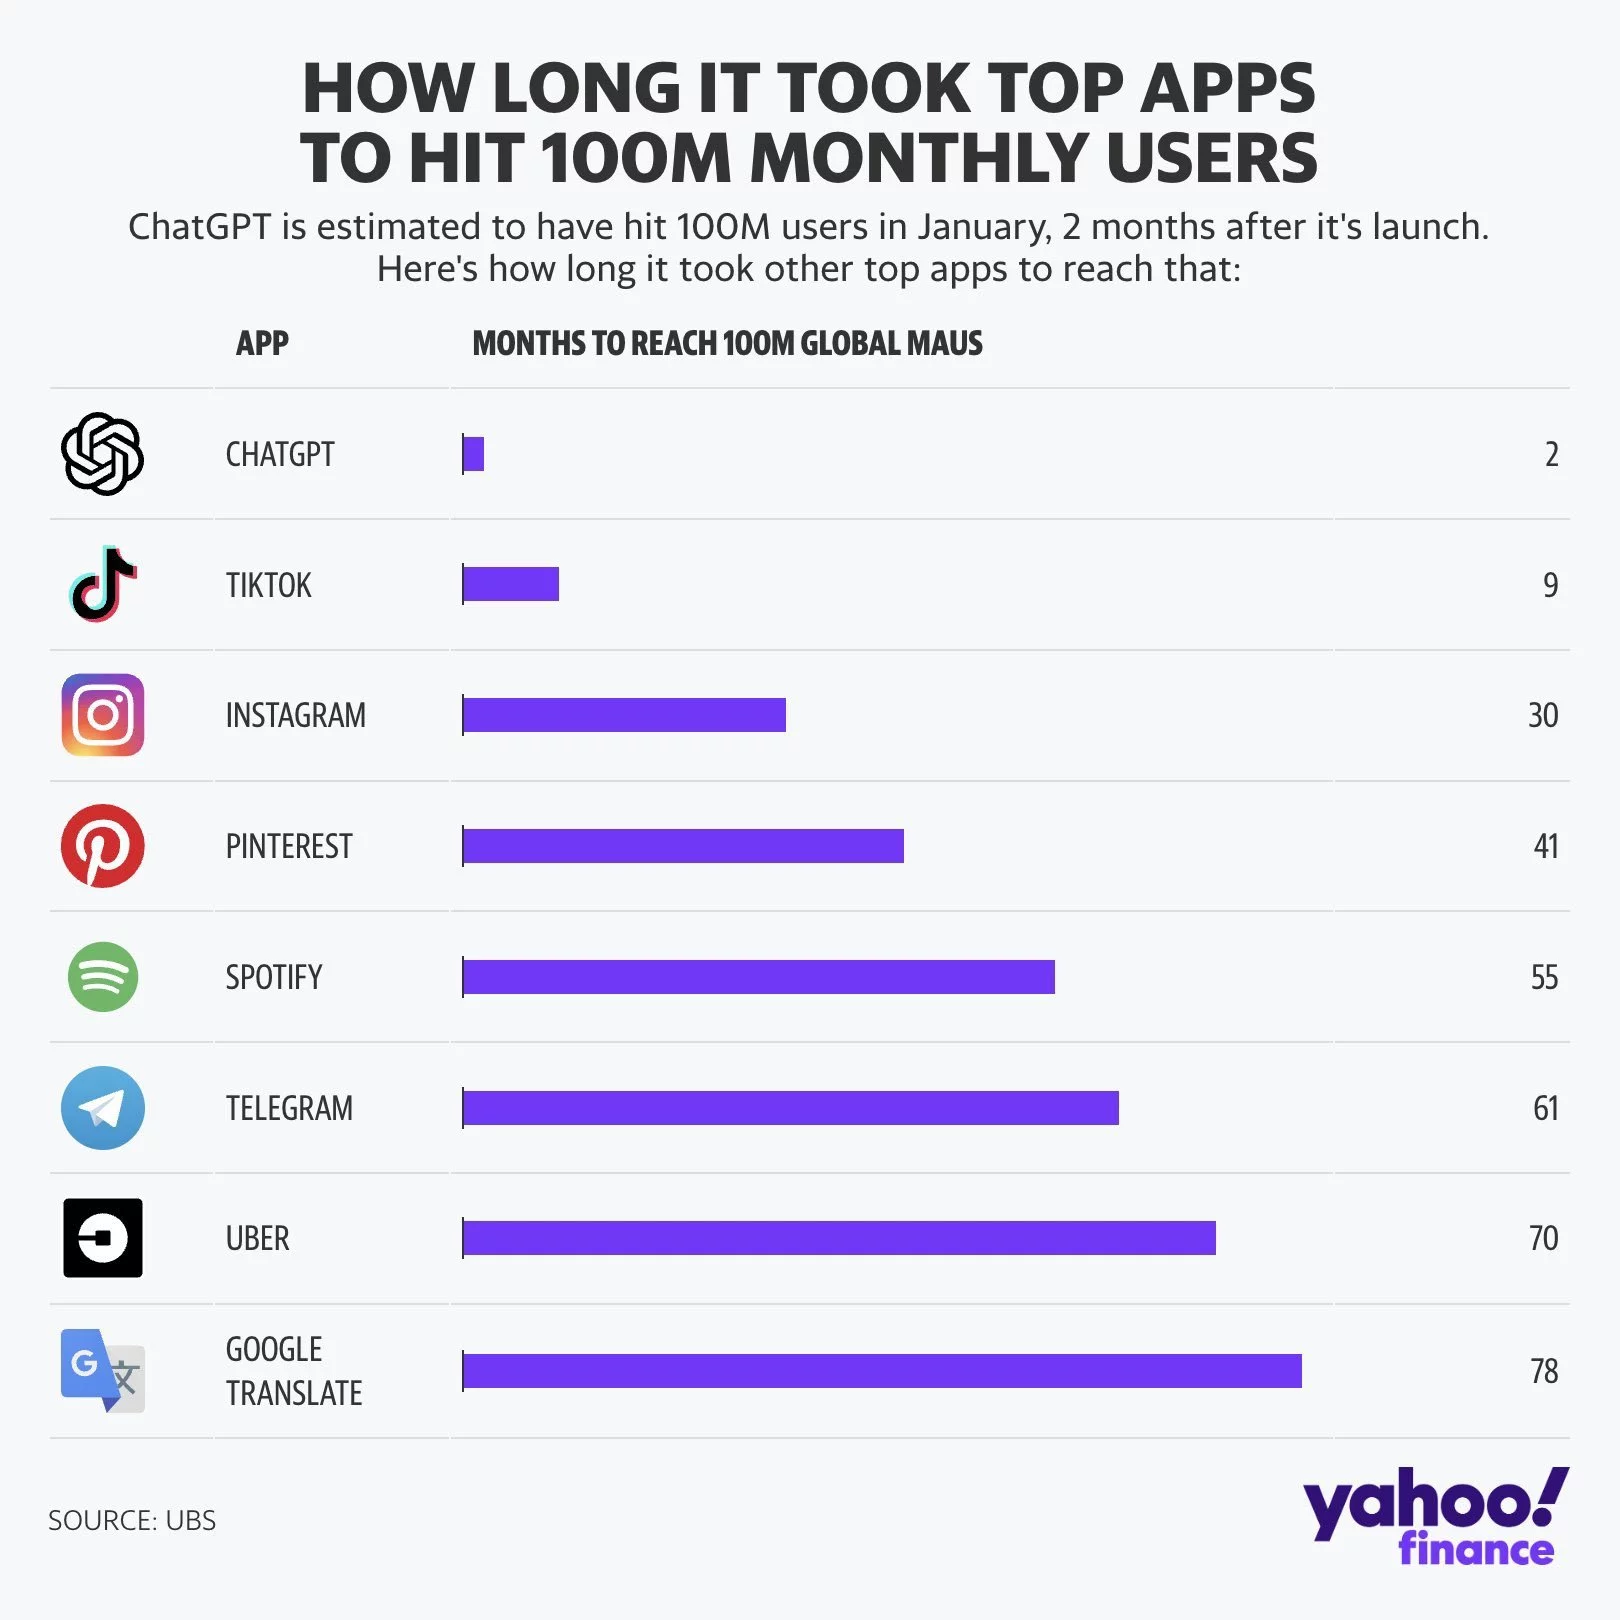 How long did it take for ChatGPT to hit 100 million monthly users? The answer is 2 months.